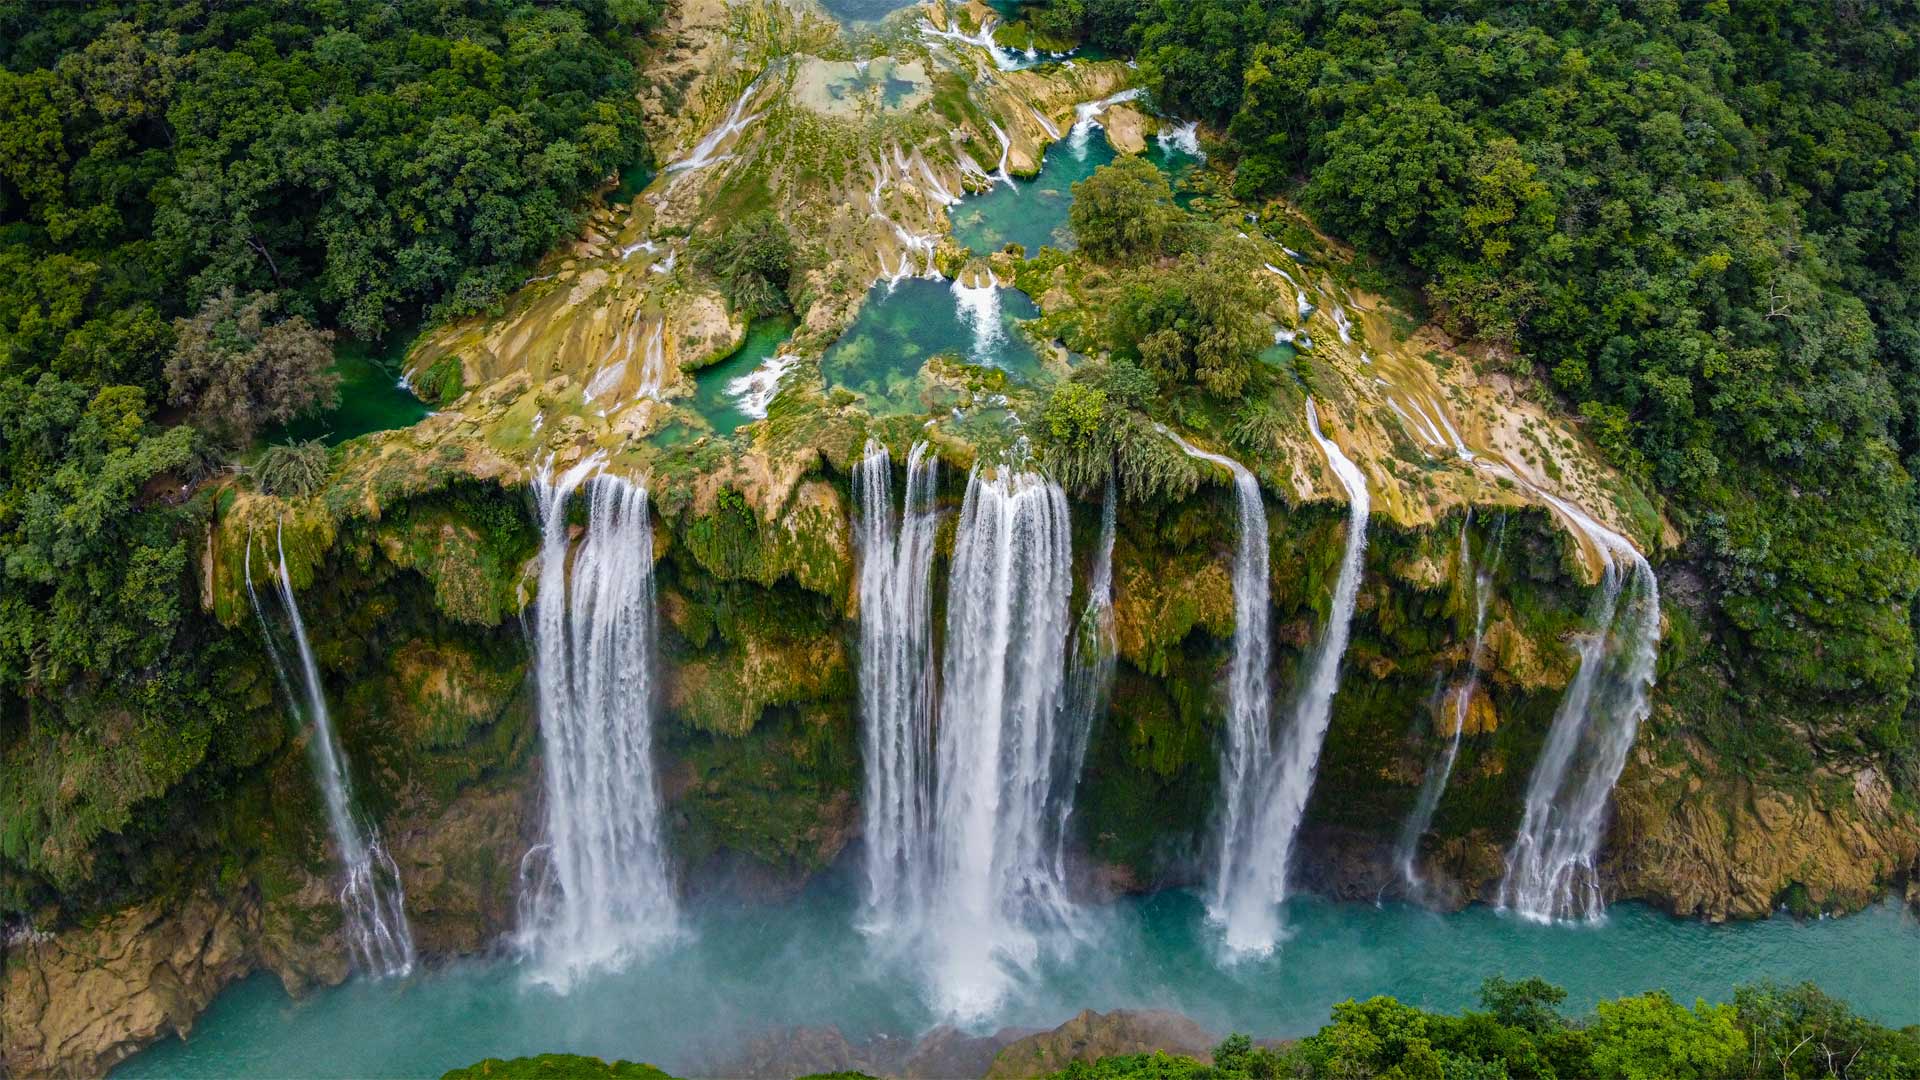 Tamul waterfall in the state of San Luis Potosí, Mexico - Robert Harding World Imagery/Offset by Shutterstock)